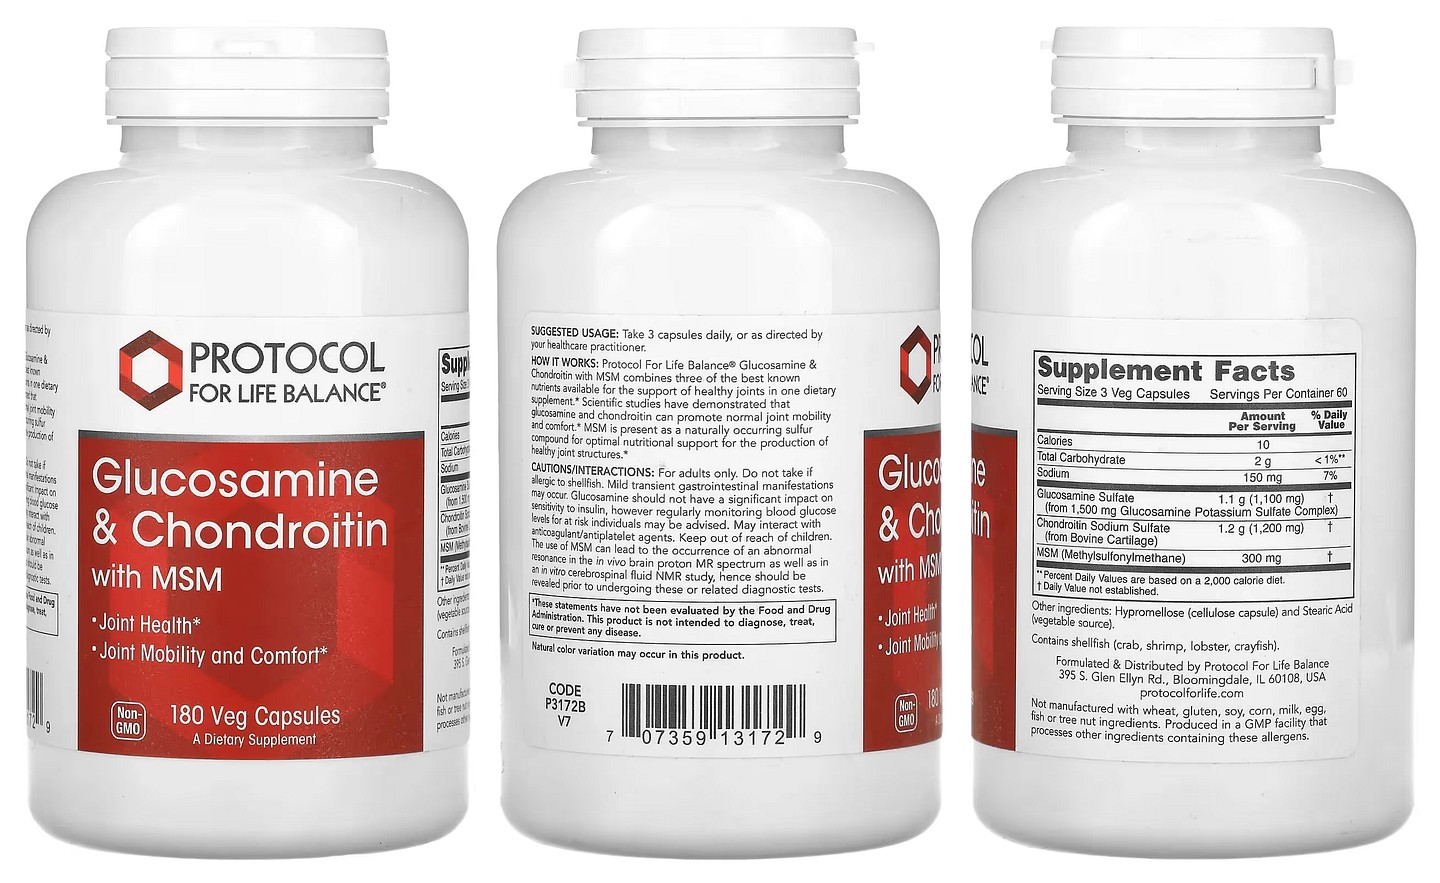 Protocol for Life Balance, Glucosamine & Chondroitin with MSM packaging